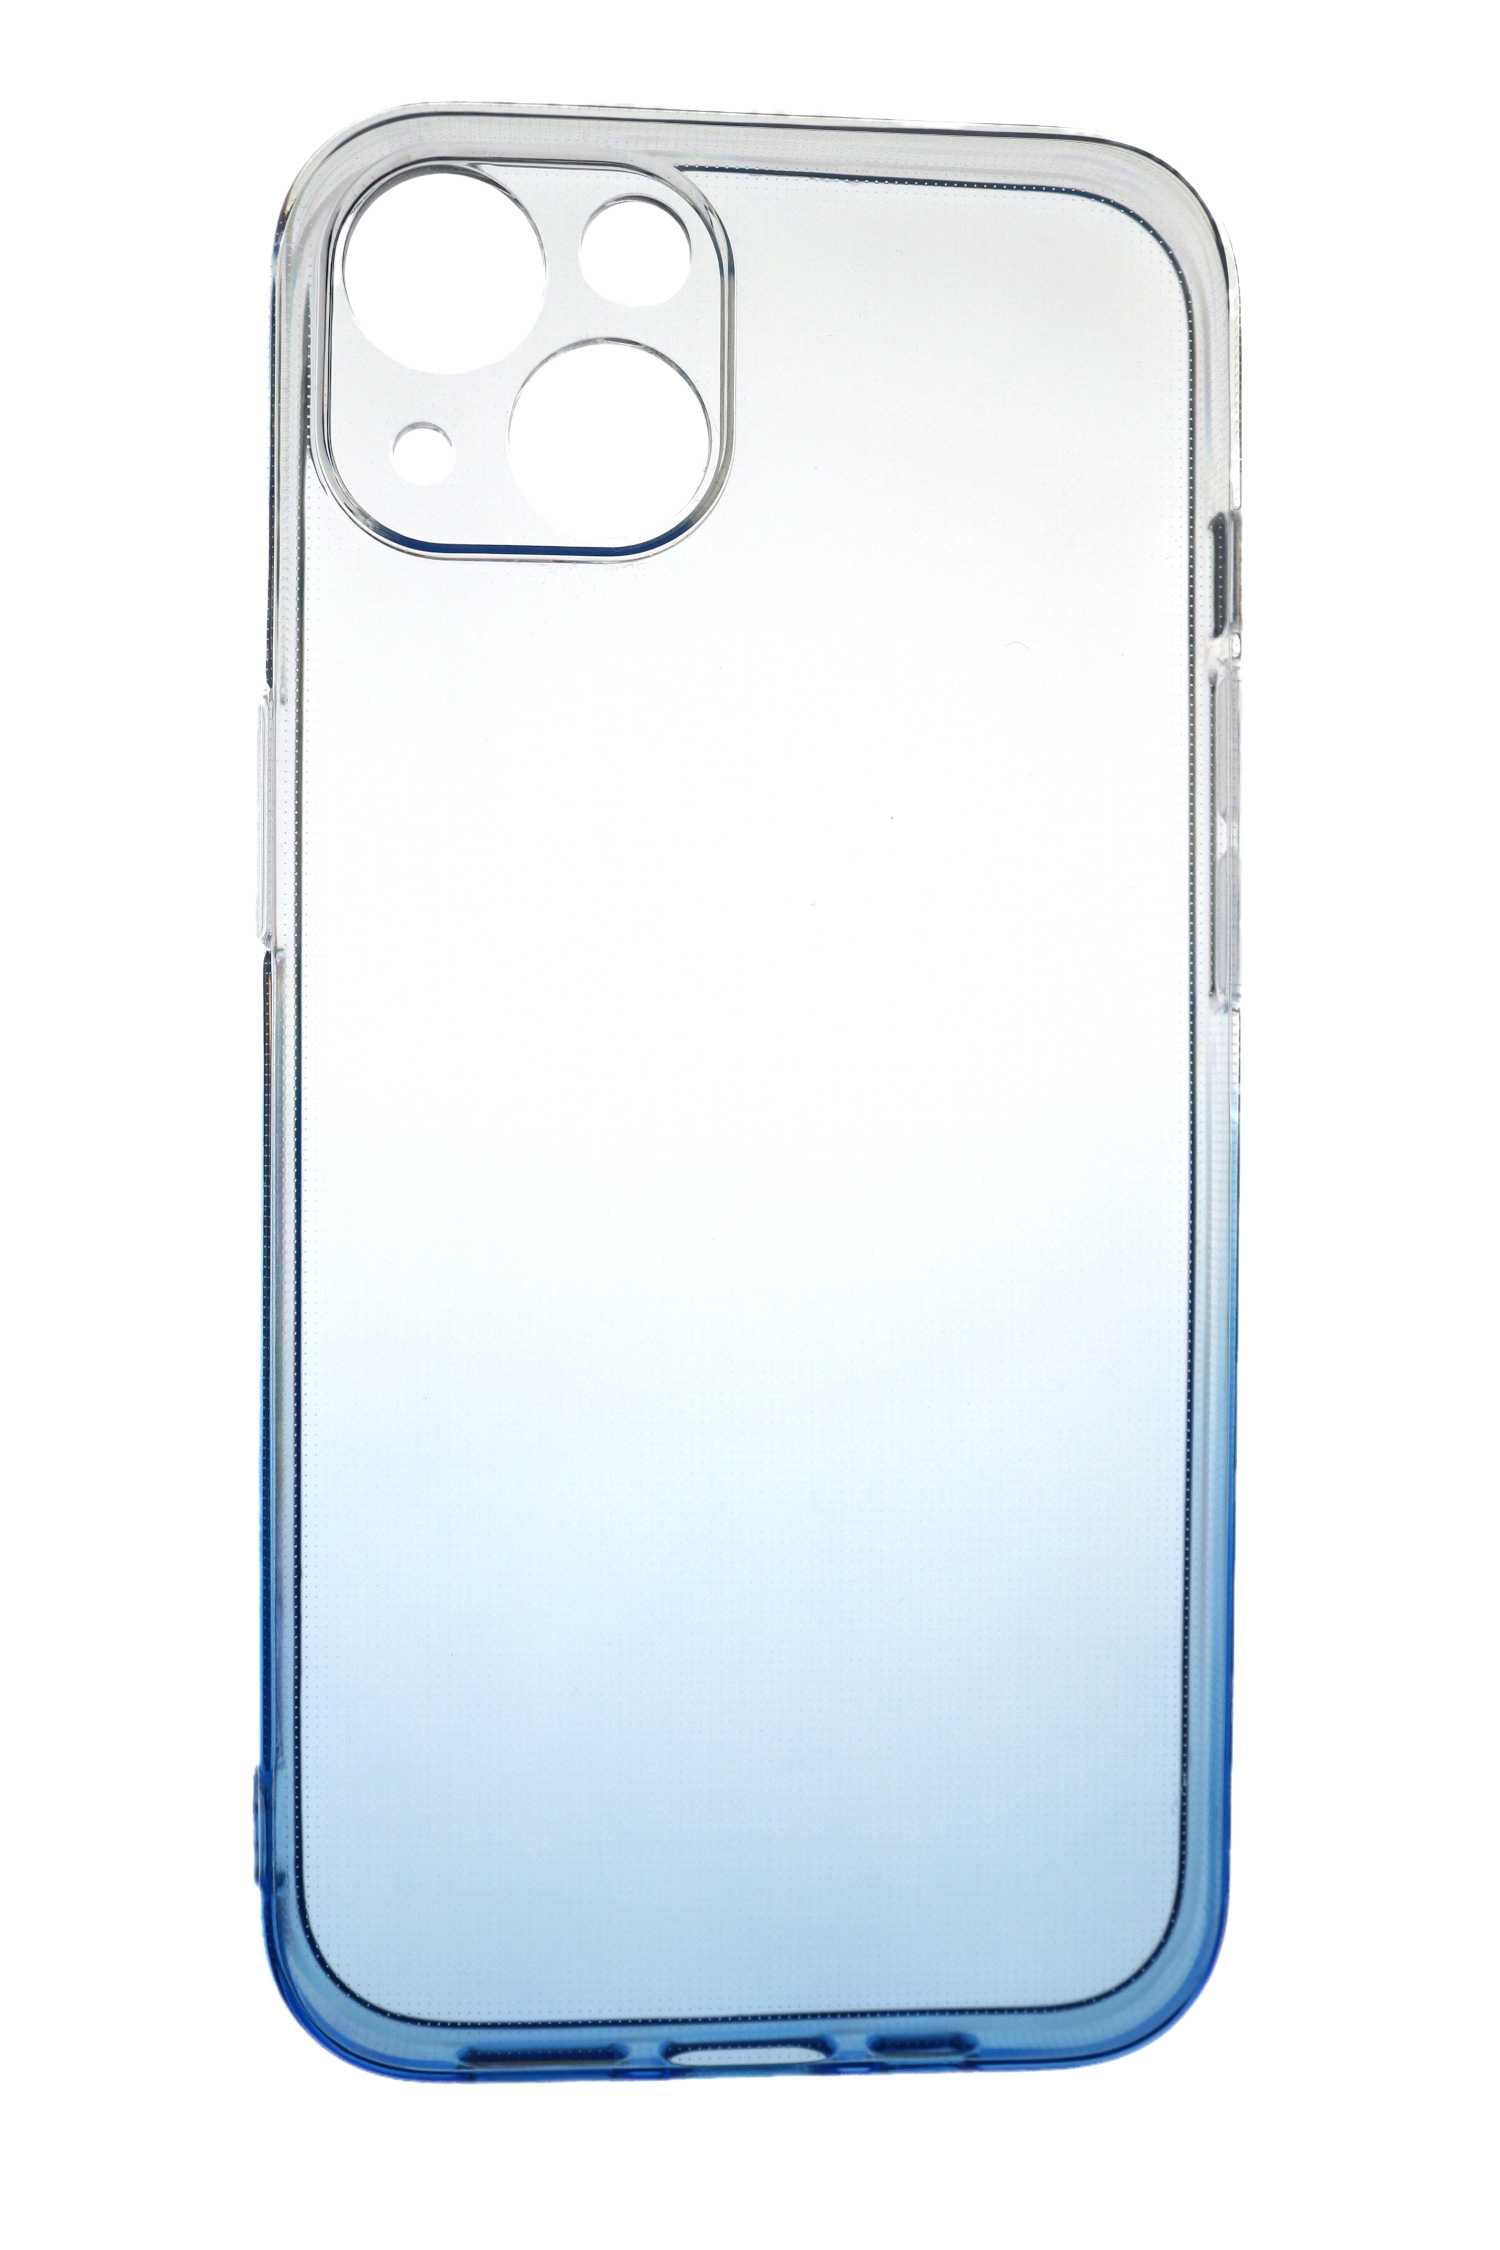 JAMCOVER 2.0 mm Blau, iPhone Backcover, Plus, Strong, 14 Transparent Apple, Case TPU